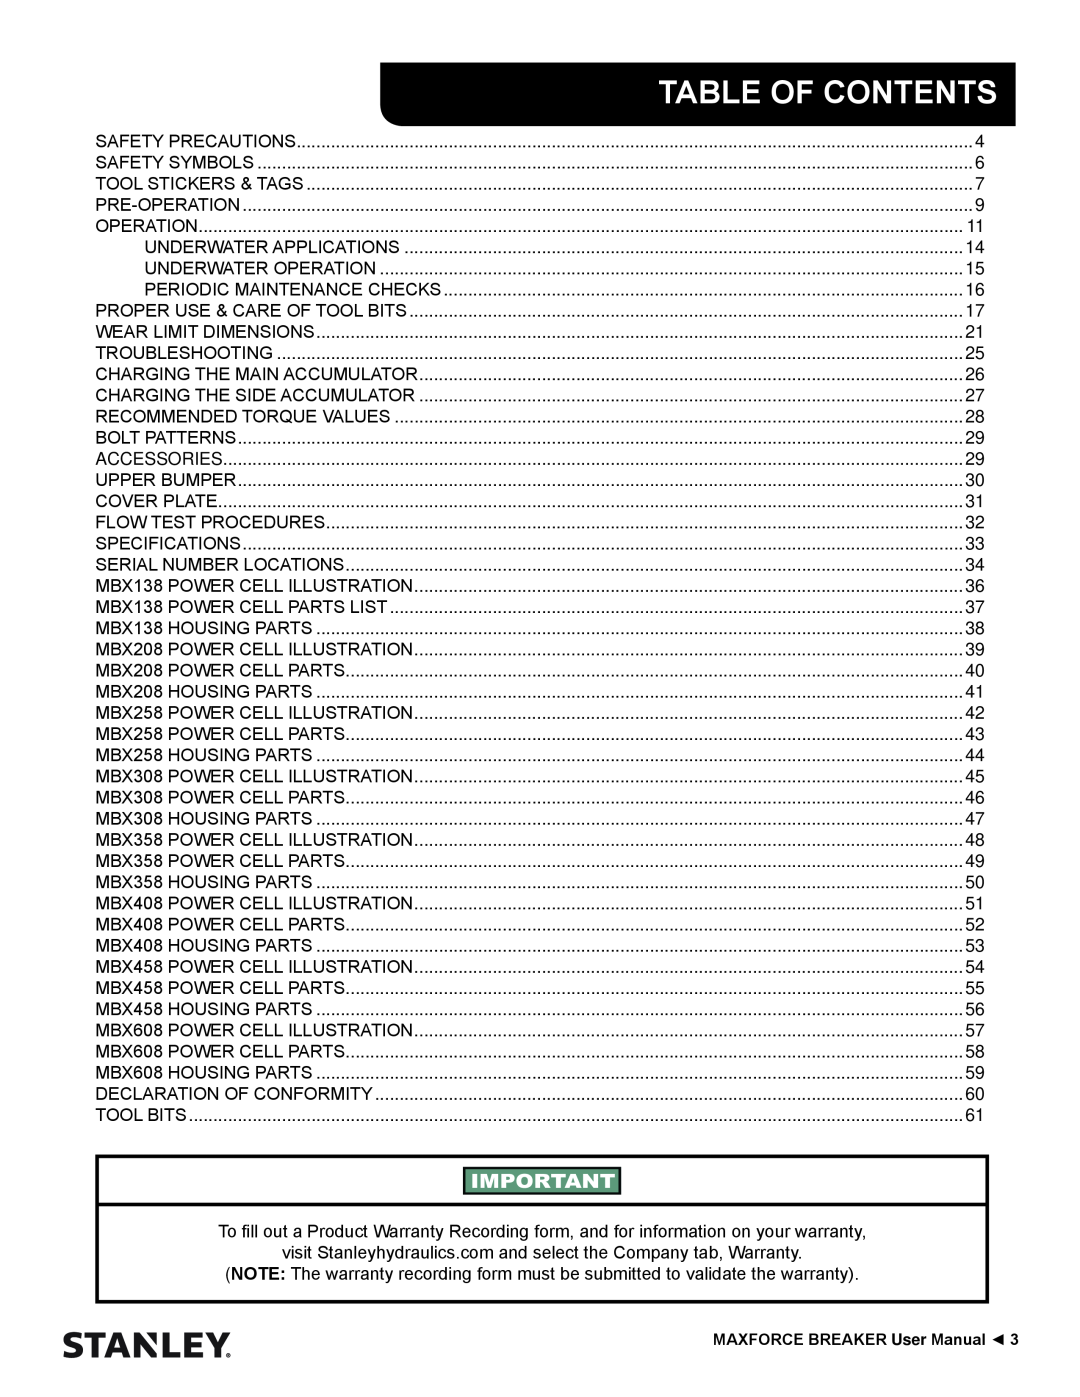 Stanley Black & Decker MBX138 thru MBX608 user manual Table Of Contents 